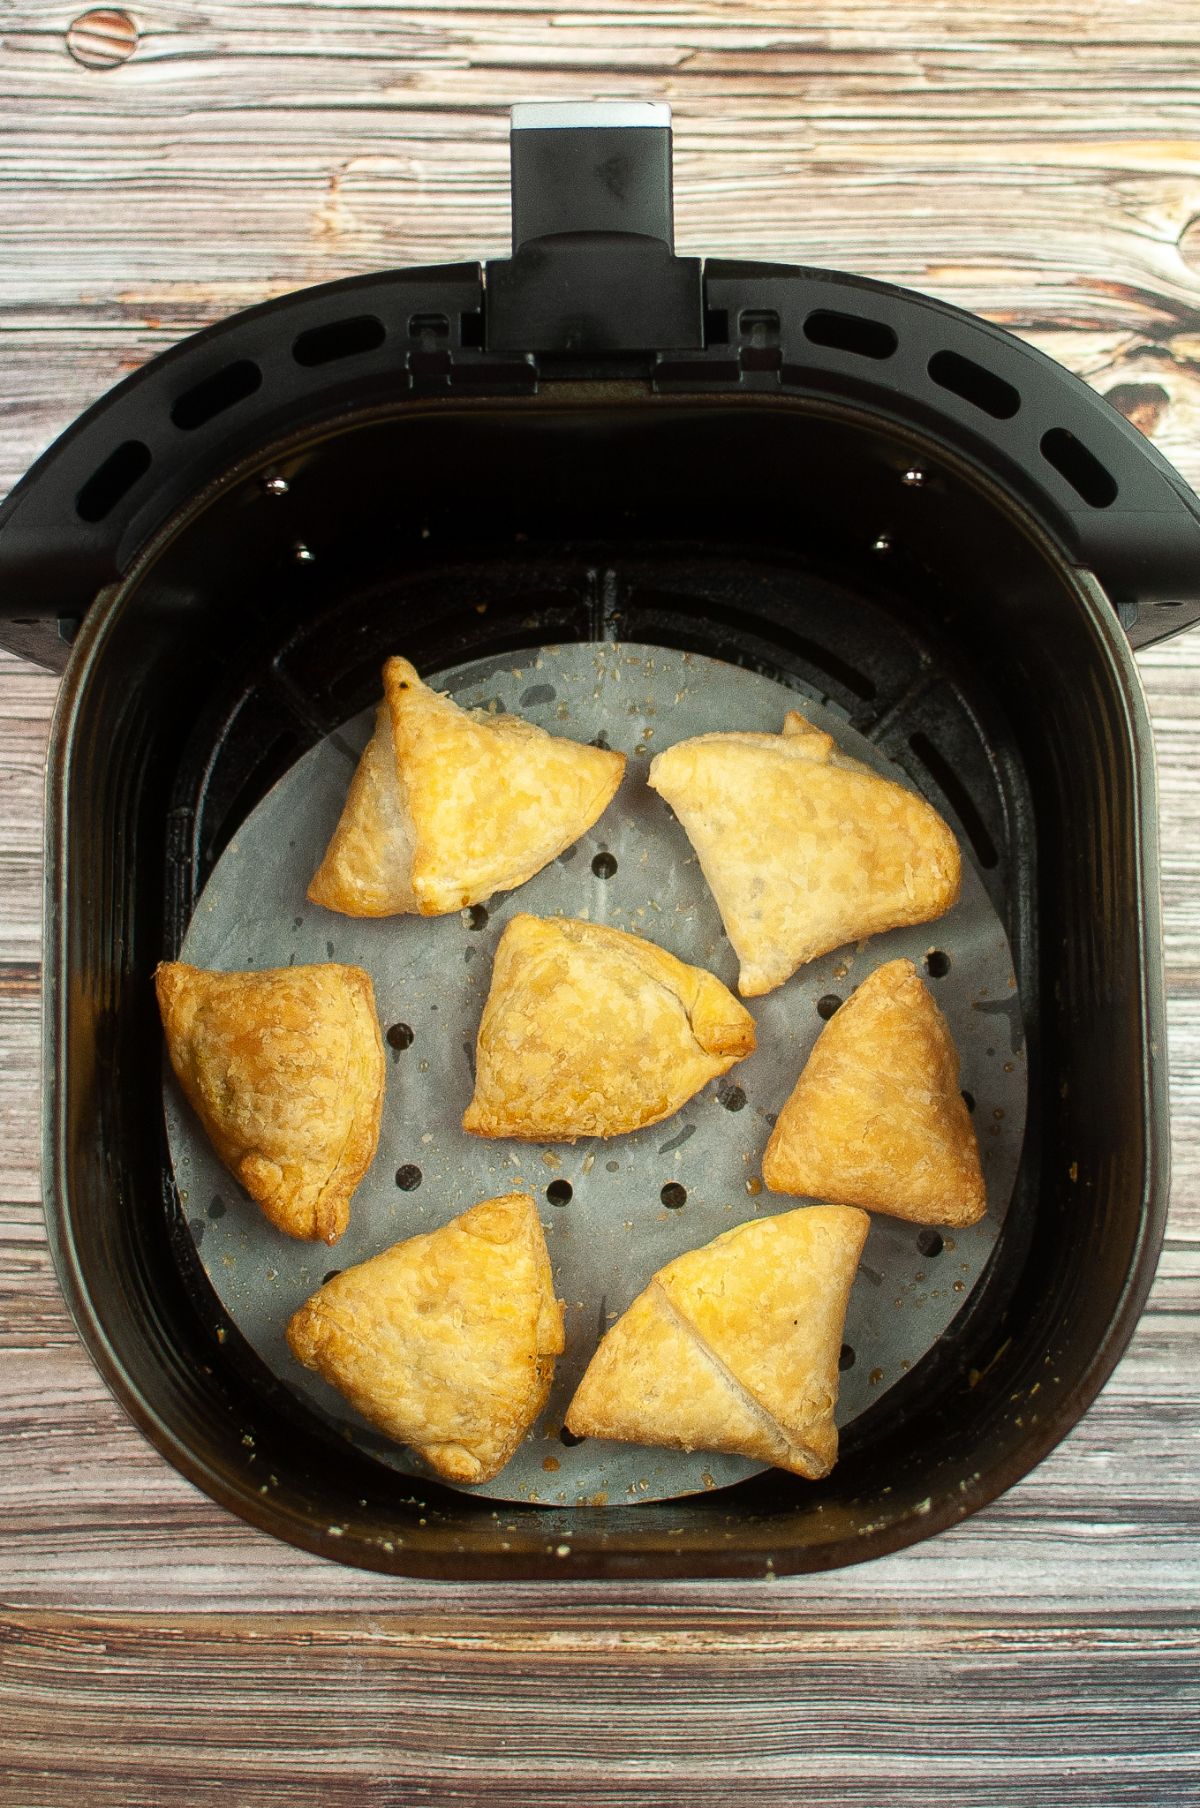 Cooked Samosas inside the Air Fryer.